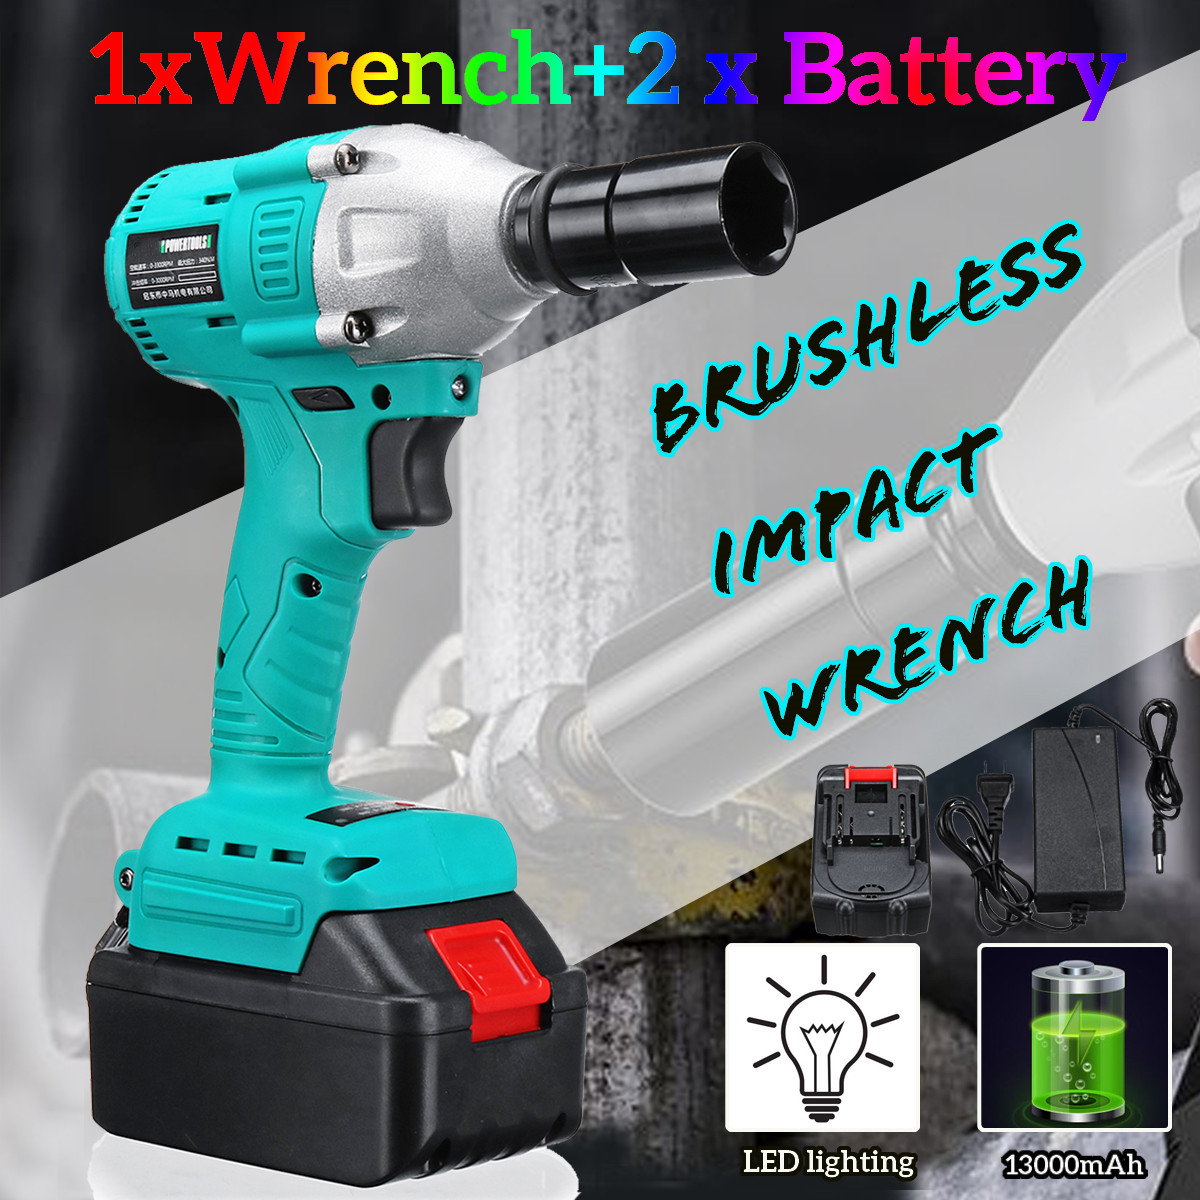 100-240V-Li-ion-Electric-Wrench-Brushless-Impact-Wrench-Wood-Work-Power-Tool-with-2-Battery-1391023-3